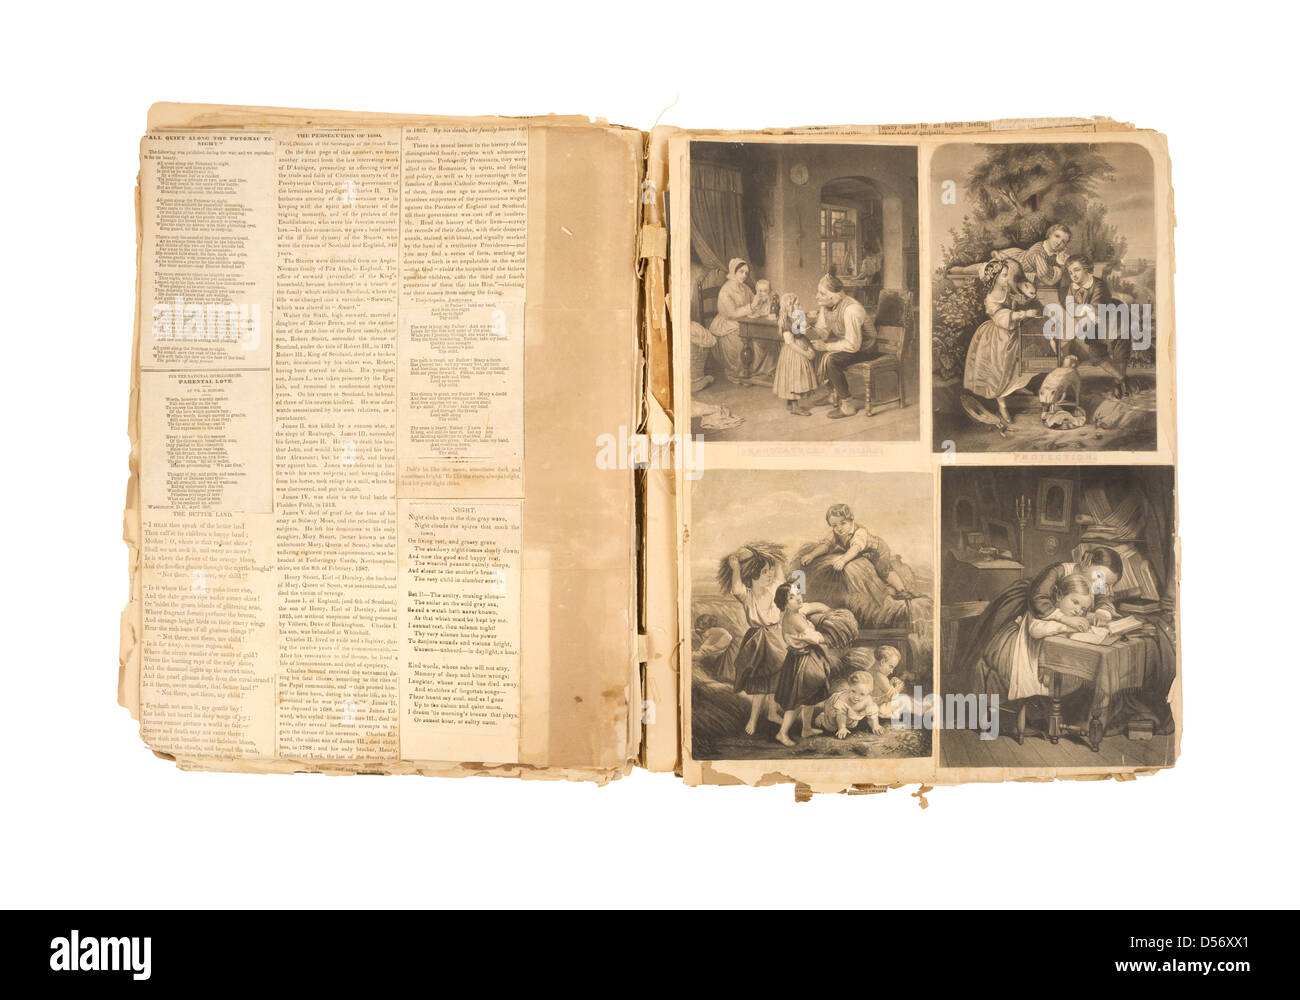 A vintage scrapbook with glued newspaper clippings and 1800s illustrations on a white background. Stock Photo